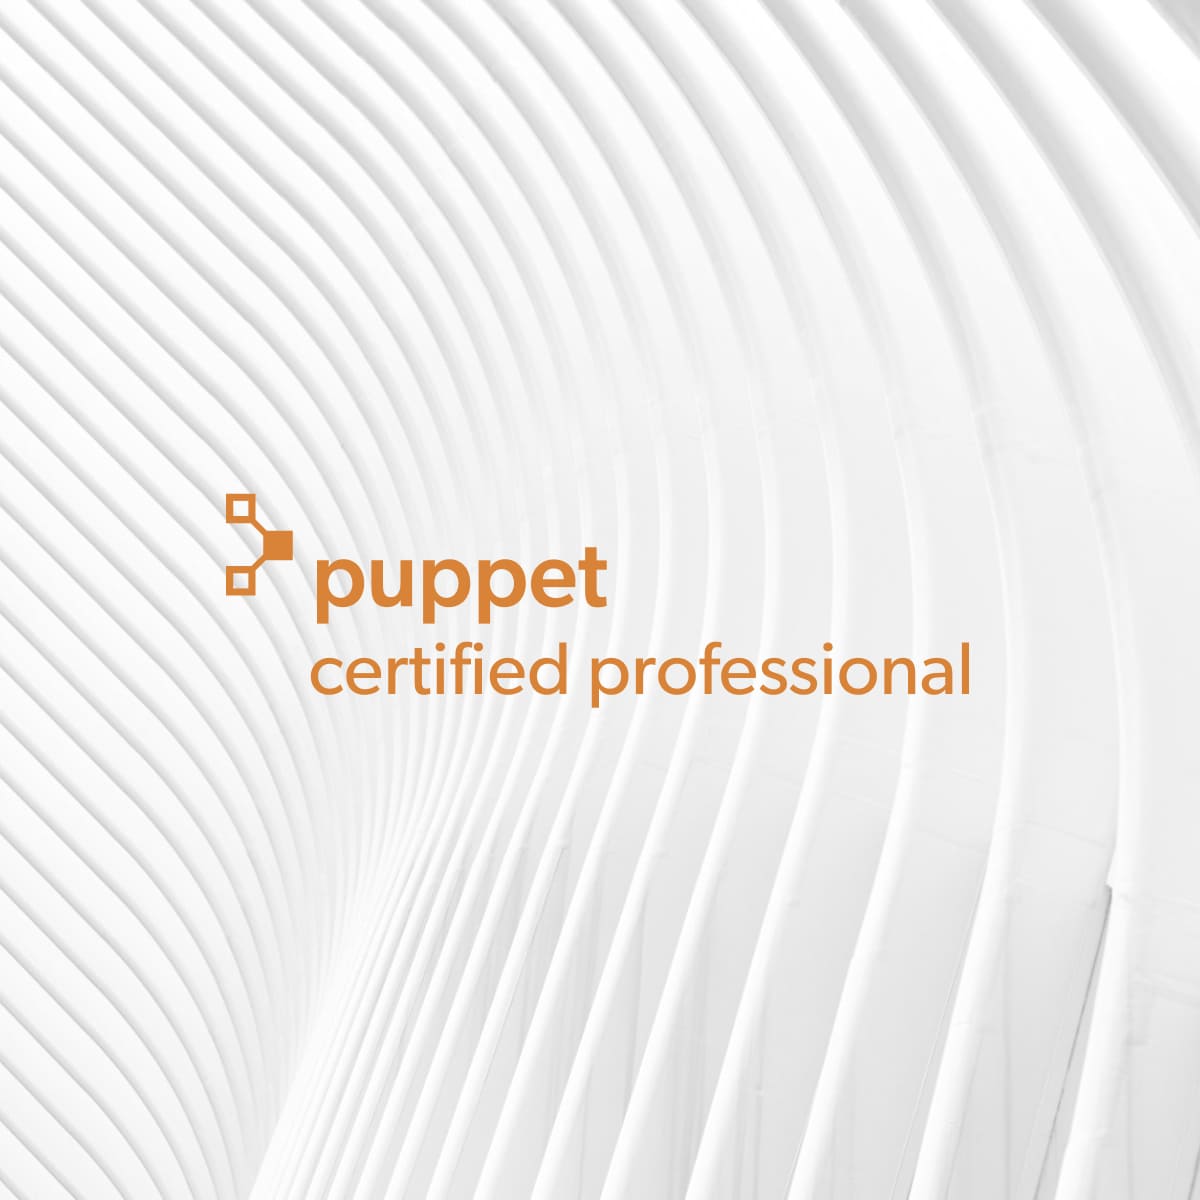 Cynerge Consulting| image: Puppet Image